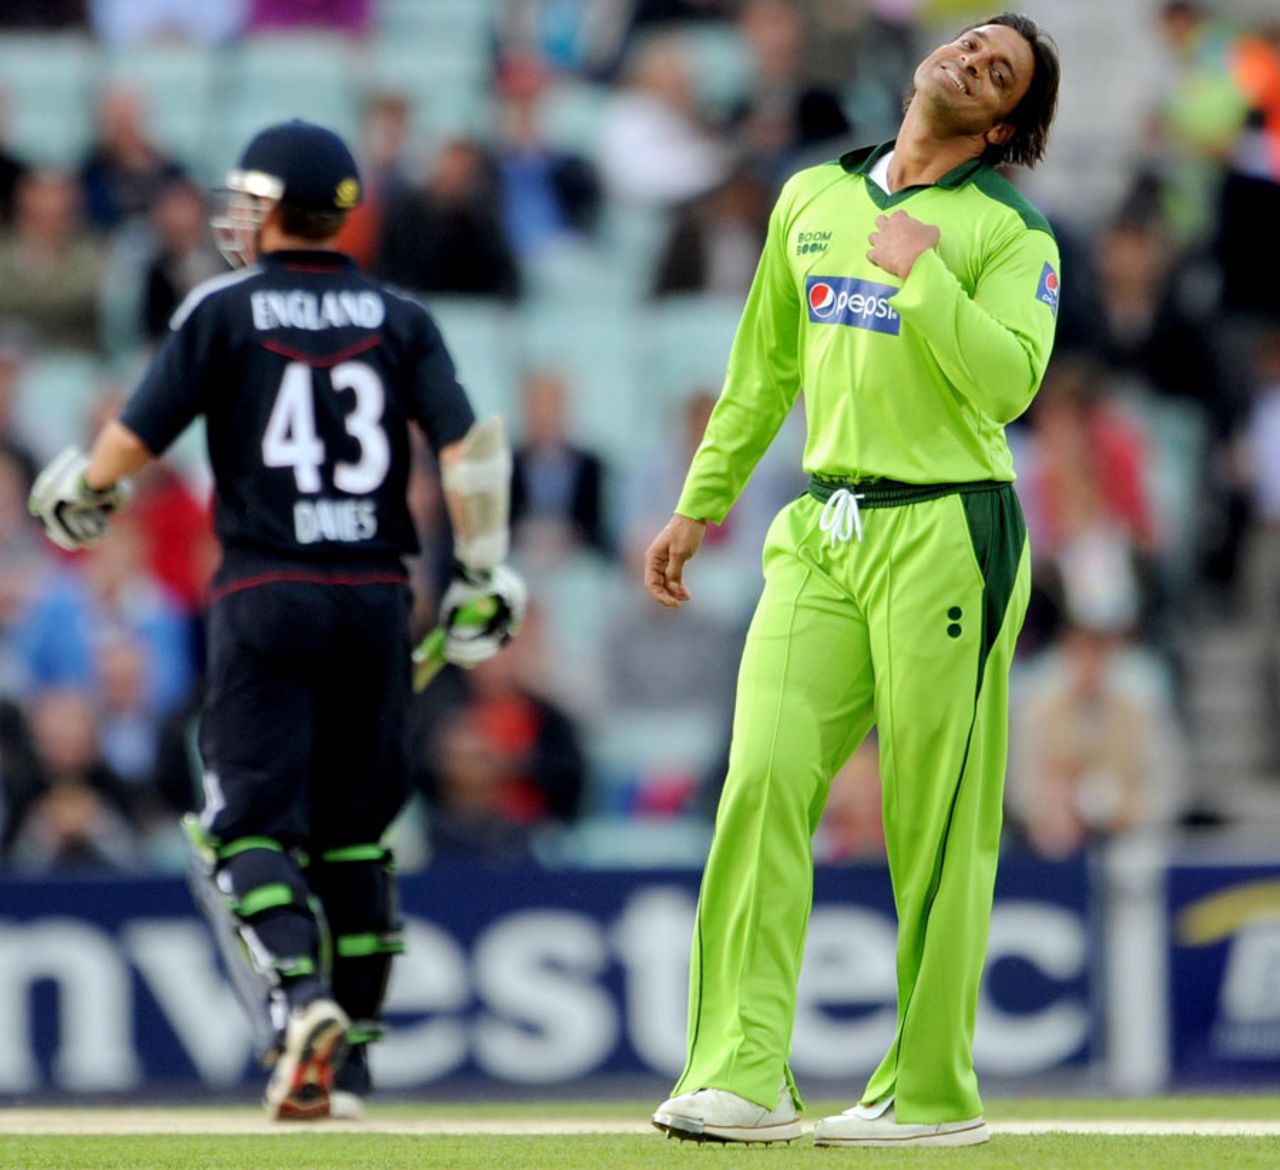 There was no luck for Shoaib Akhtar as England's openers started brightly again, England v Pakistan, 3rd ODI, The Oval, September 17 2010